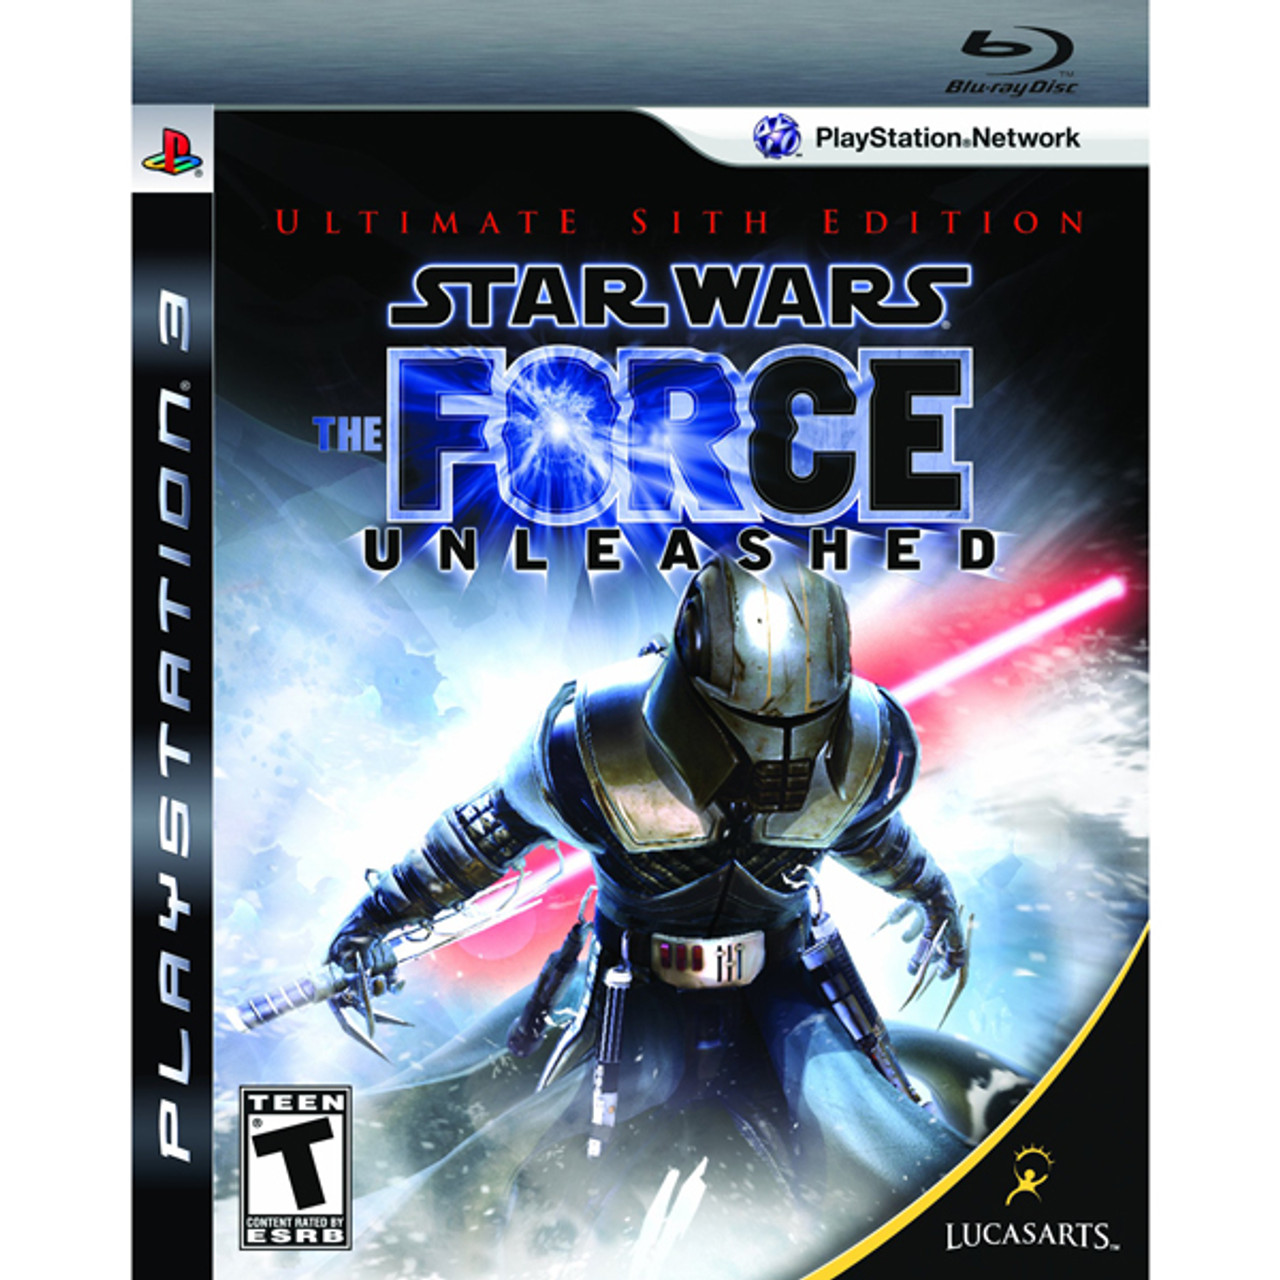 Star Wars: The Force Unleashed (PS3) (eng) b/o - AliExpress